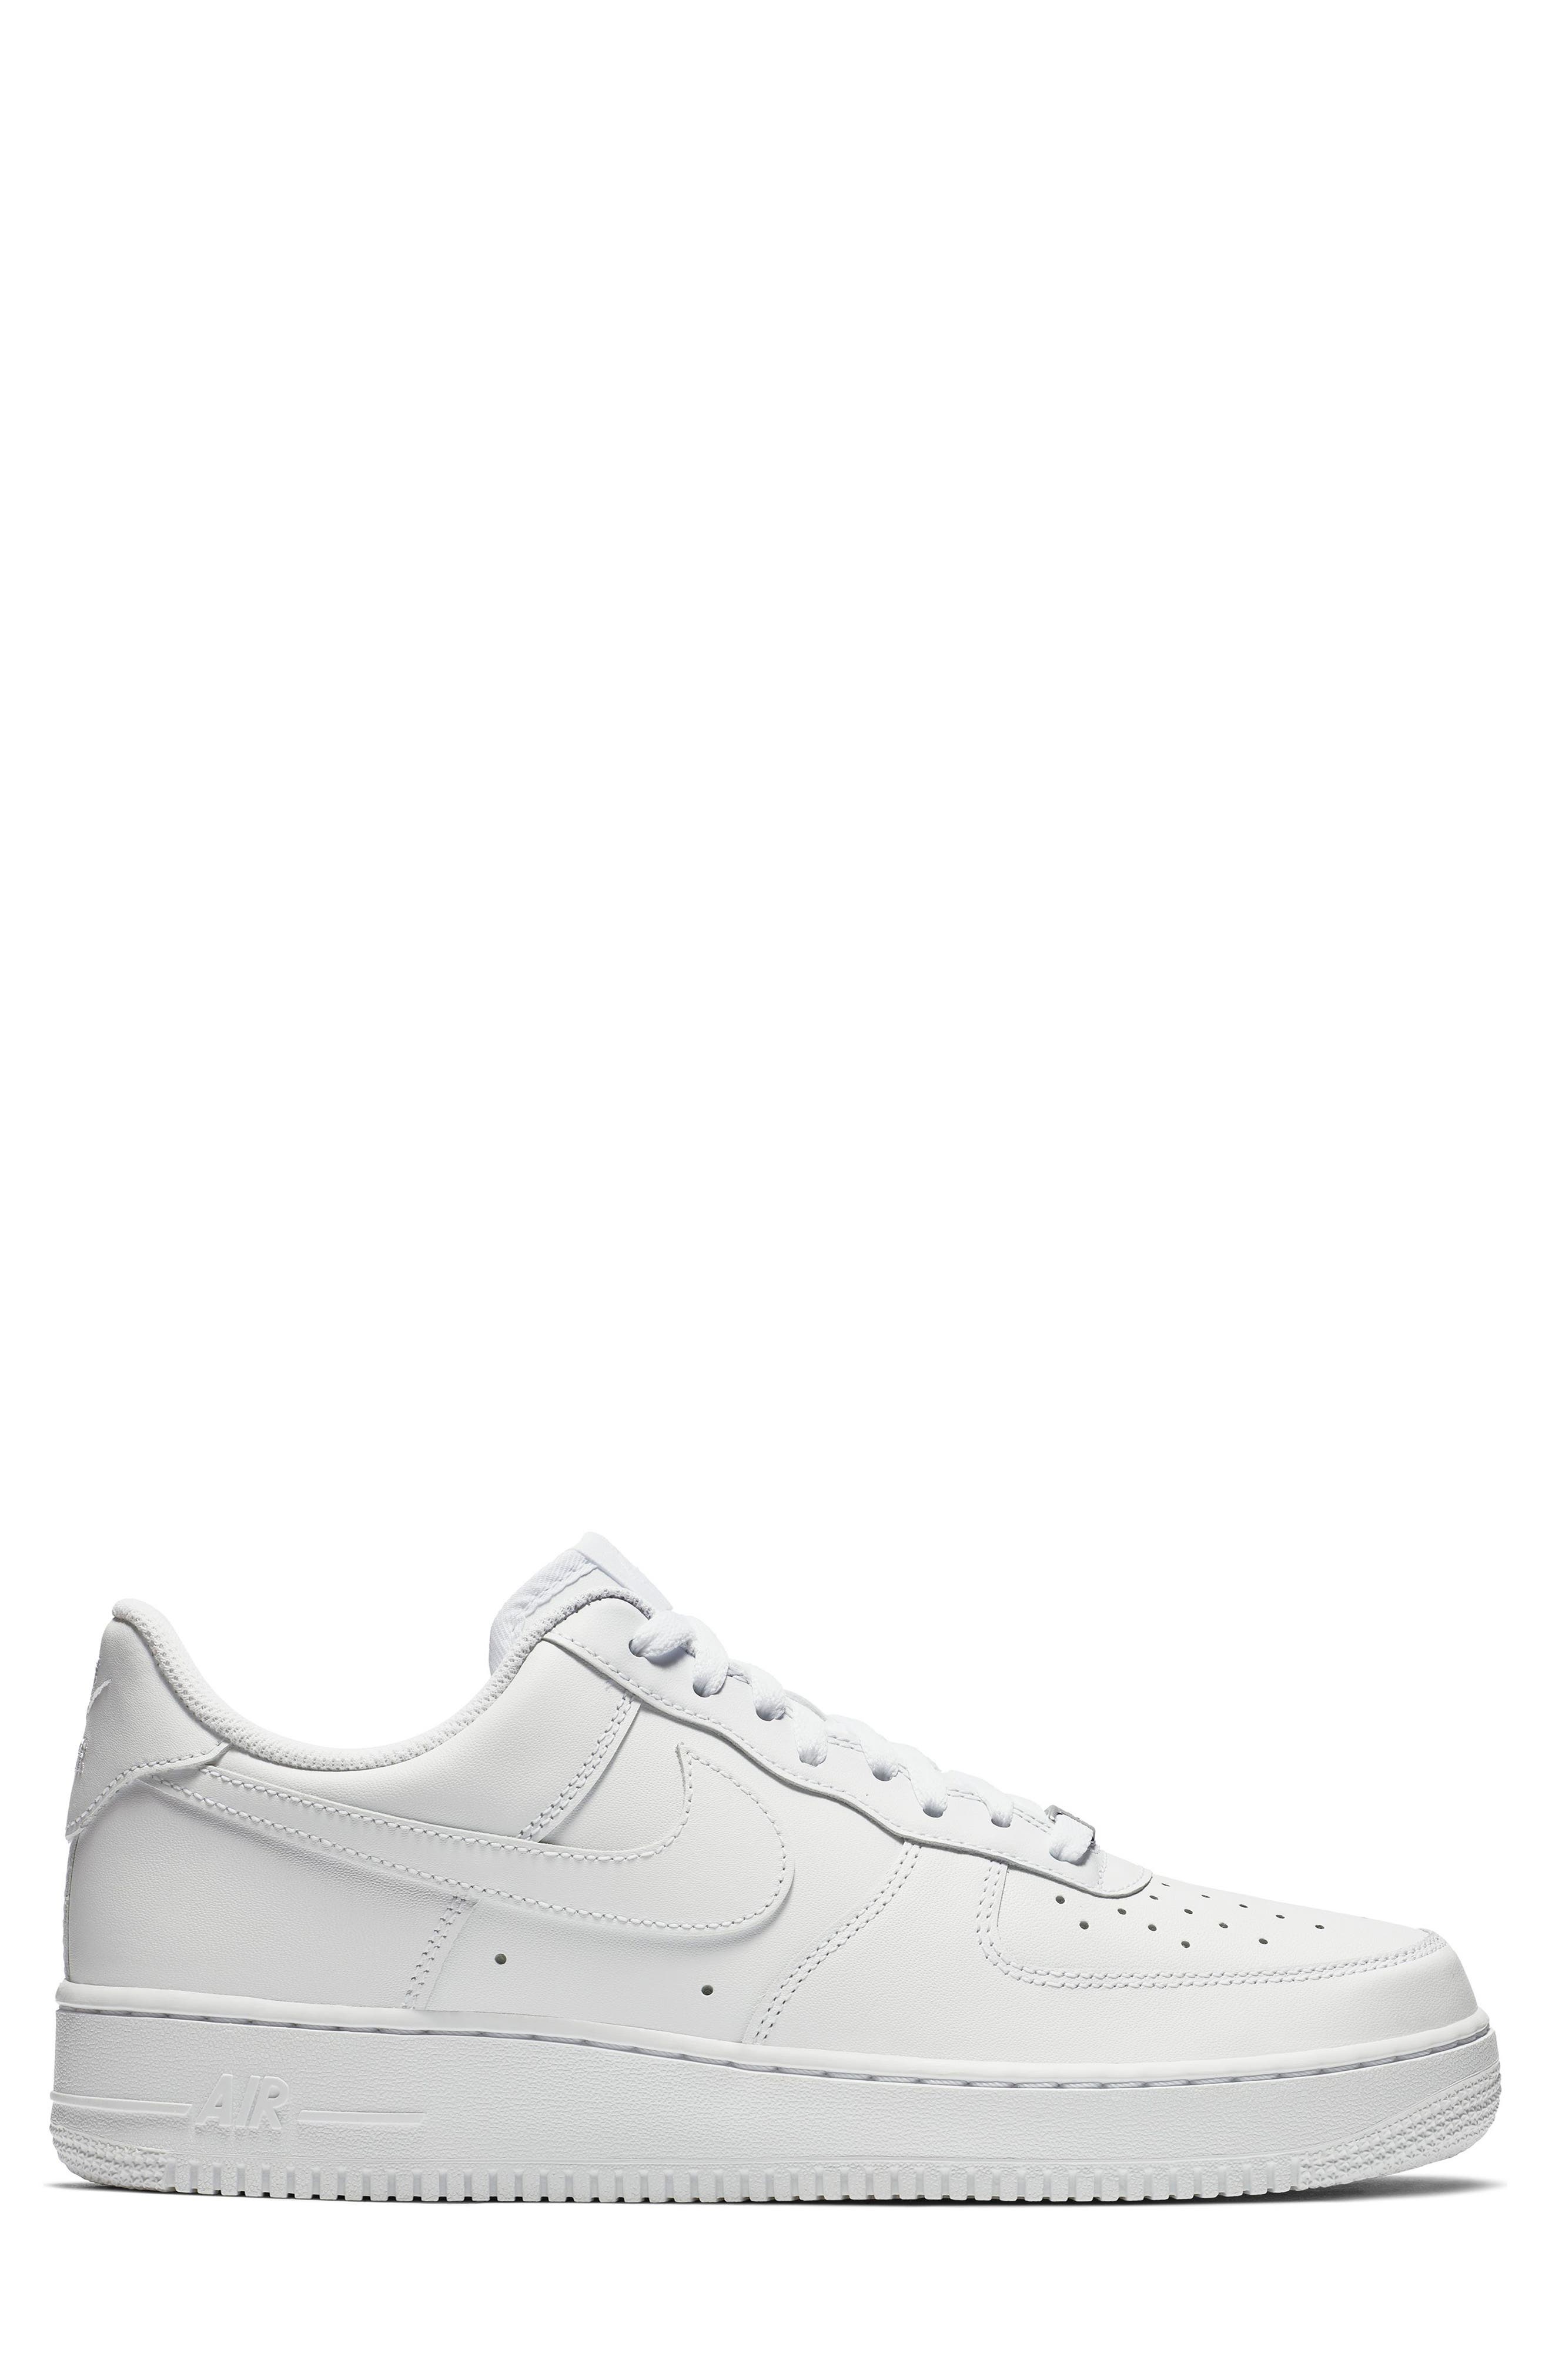 nordstrom air force one womens